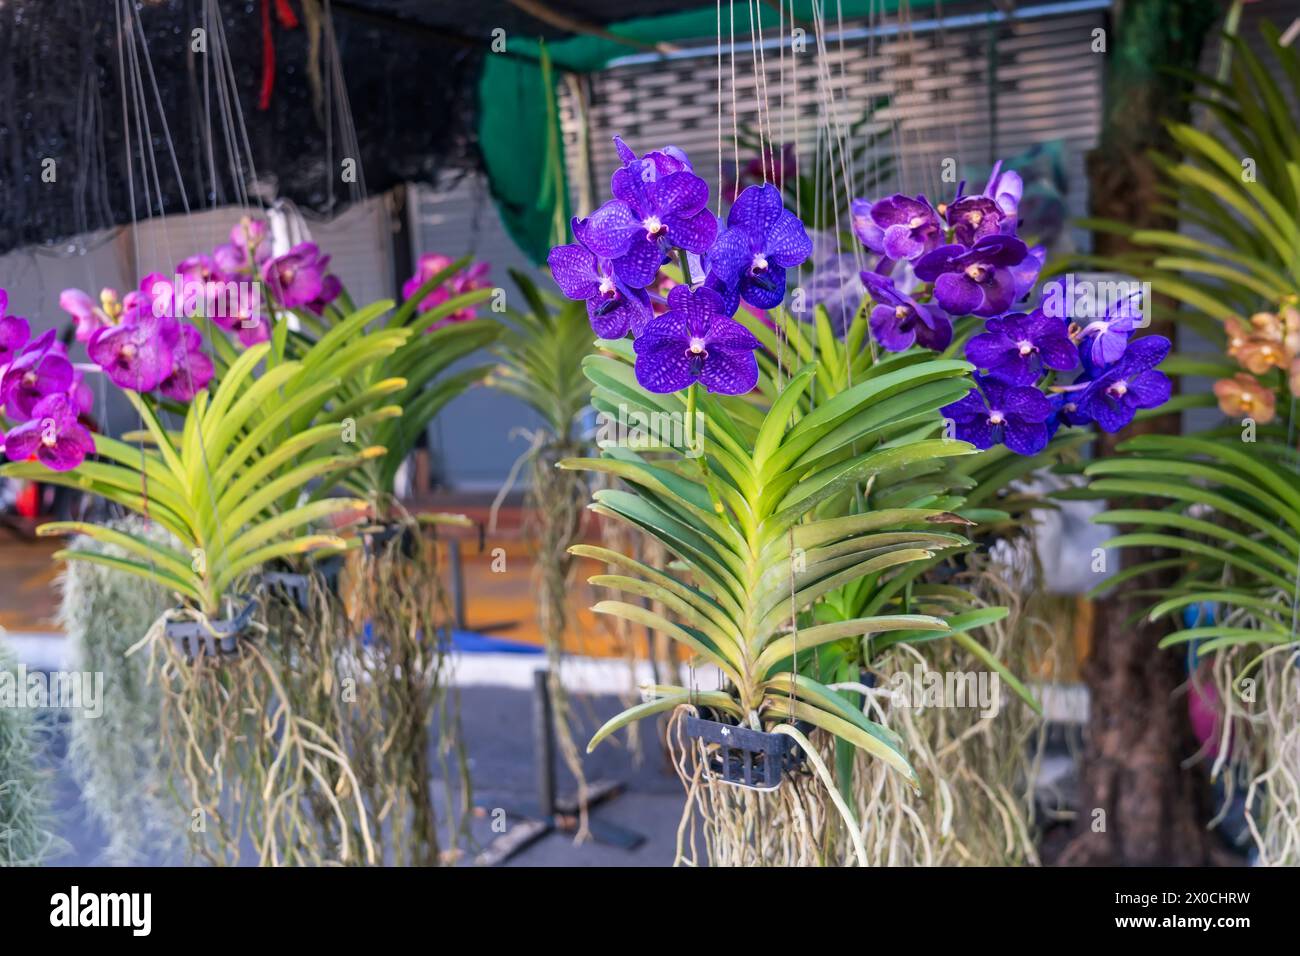 Beautiful vanda orchidee kaufen orchids with beautiful flowers and green leaves. Many different colors on display in a garden center. Stock Photo